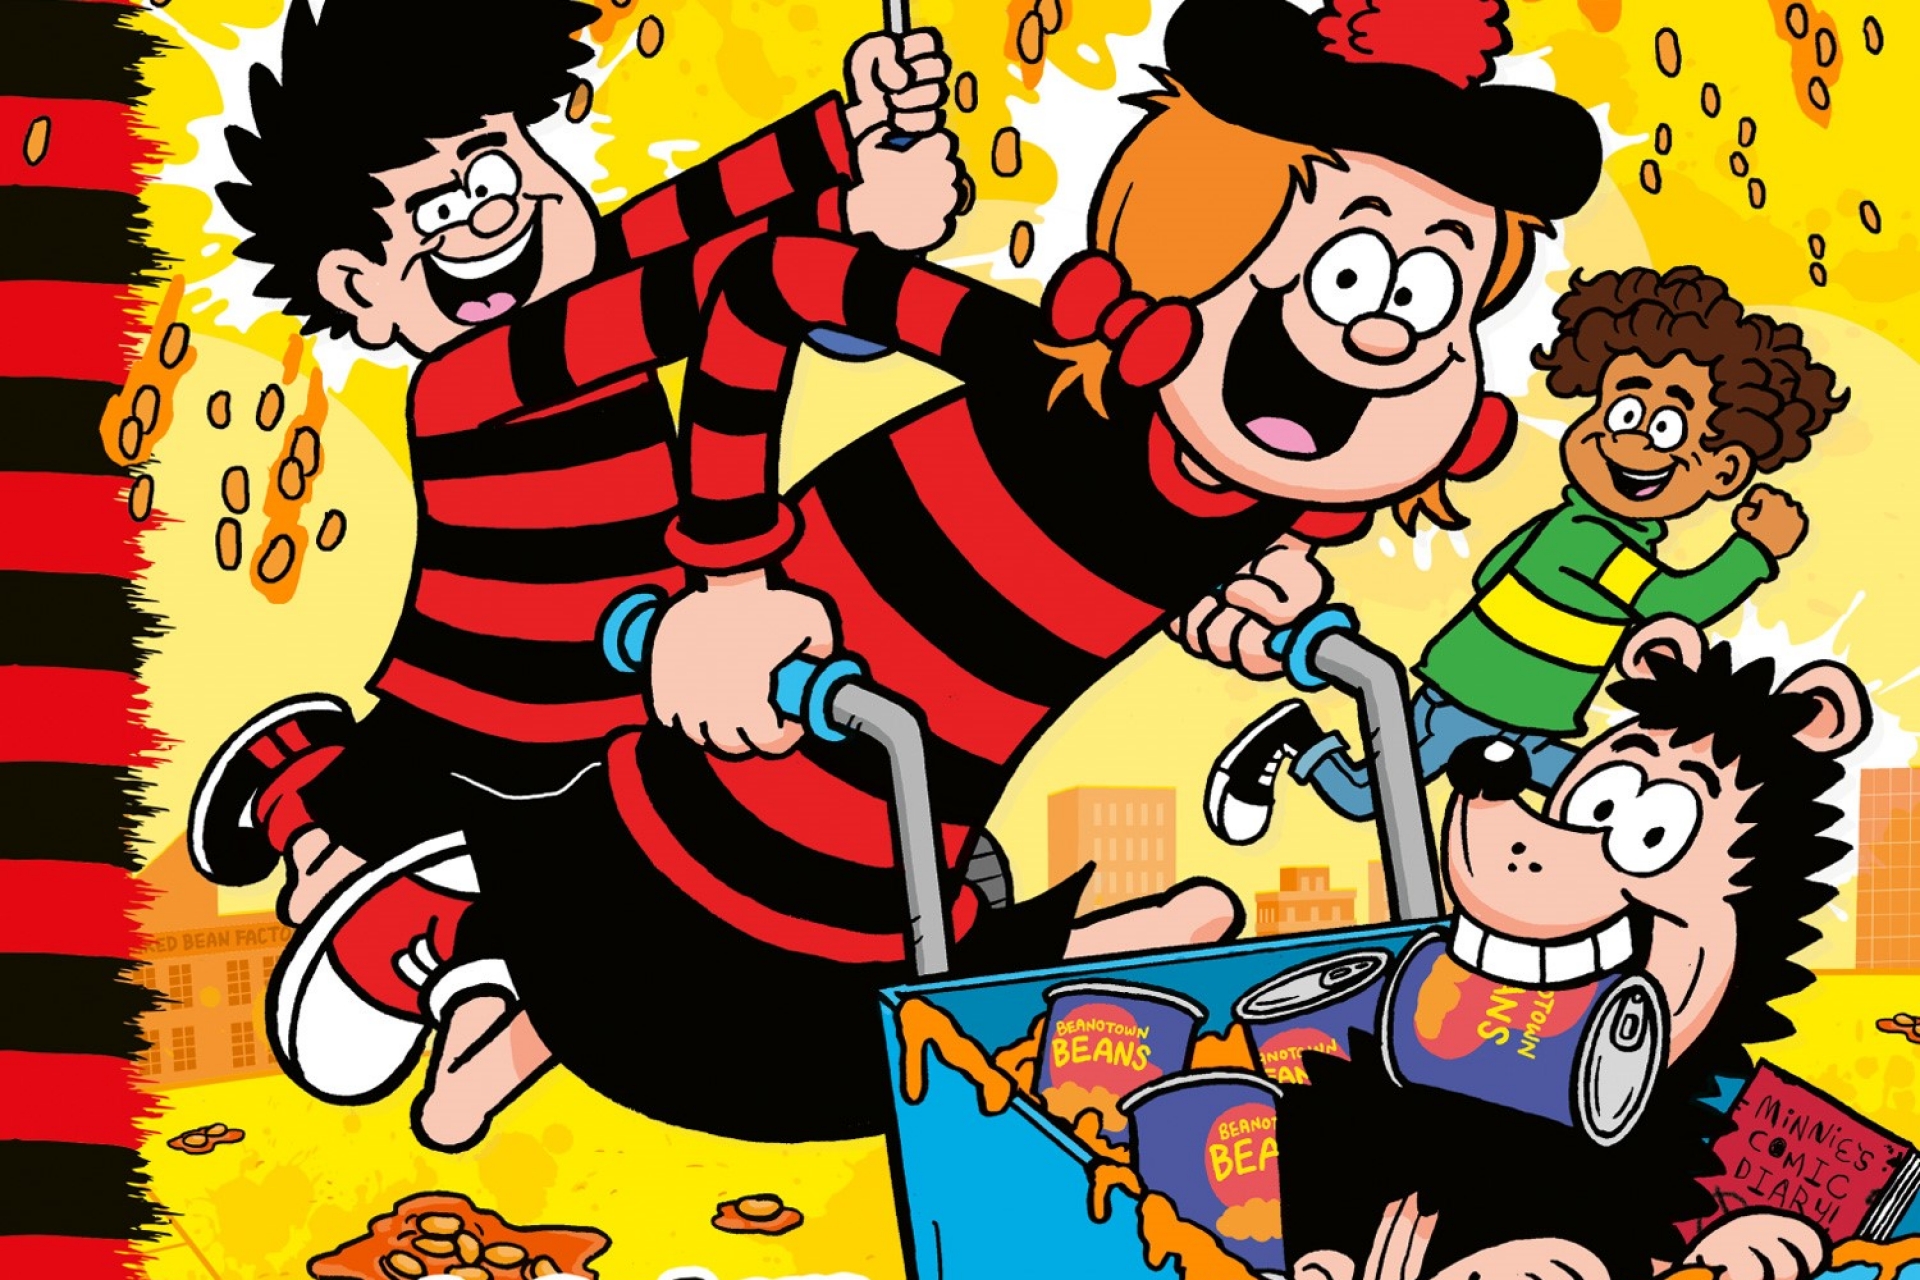 Beano Fiction - We Are Big Fans of Minnie the Minx and the Boomic